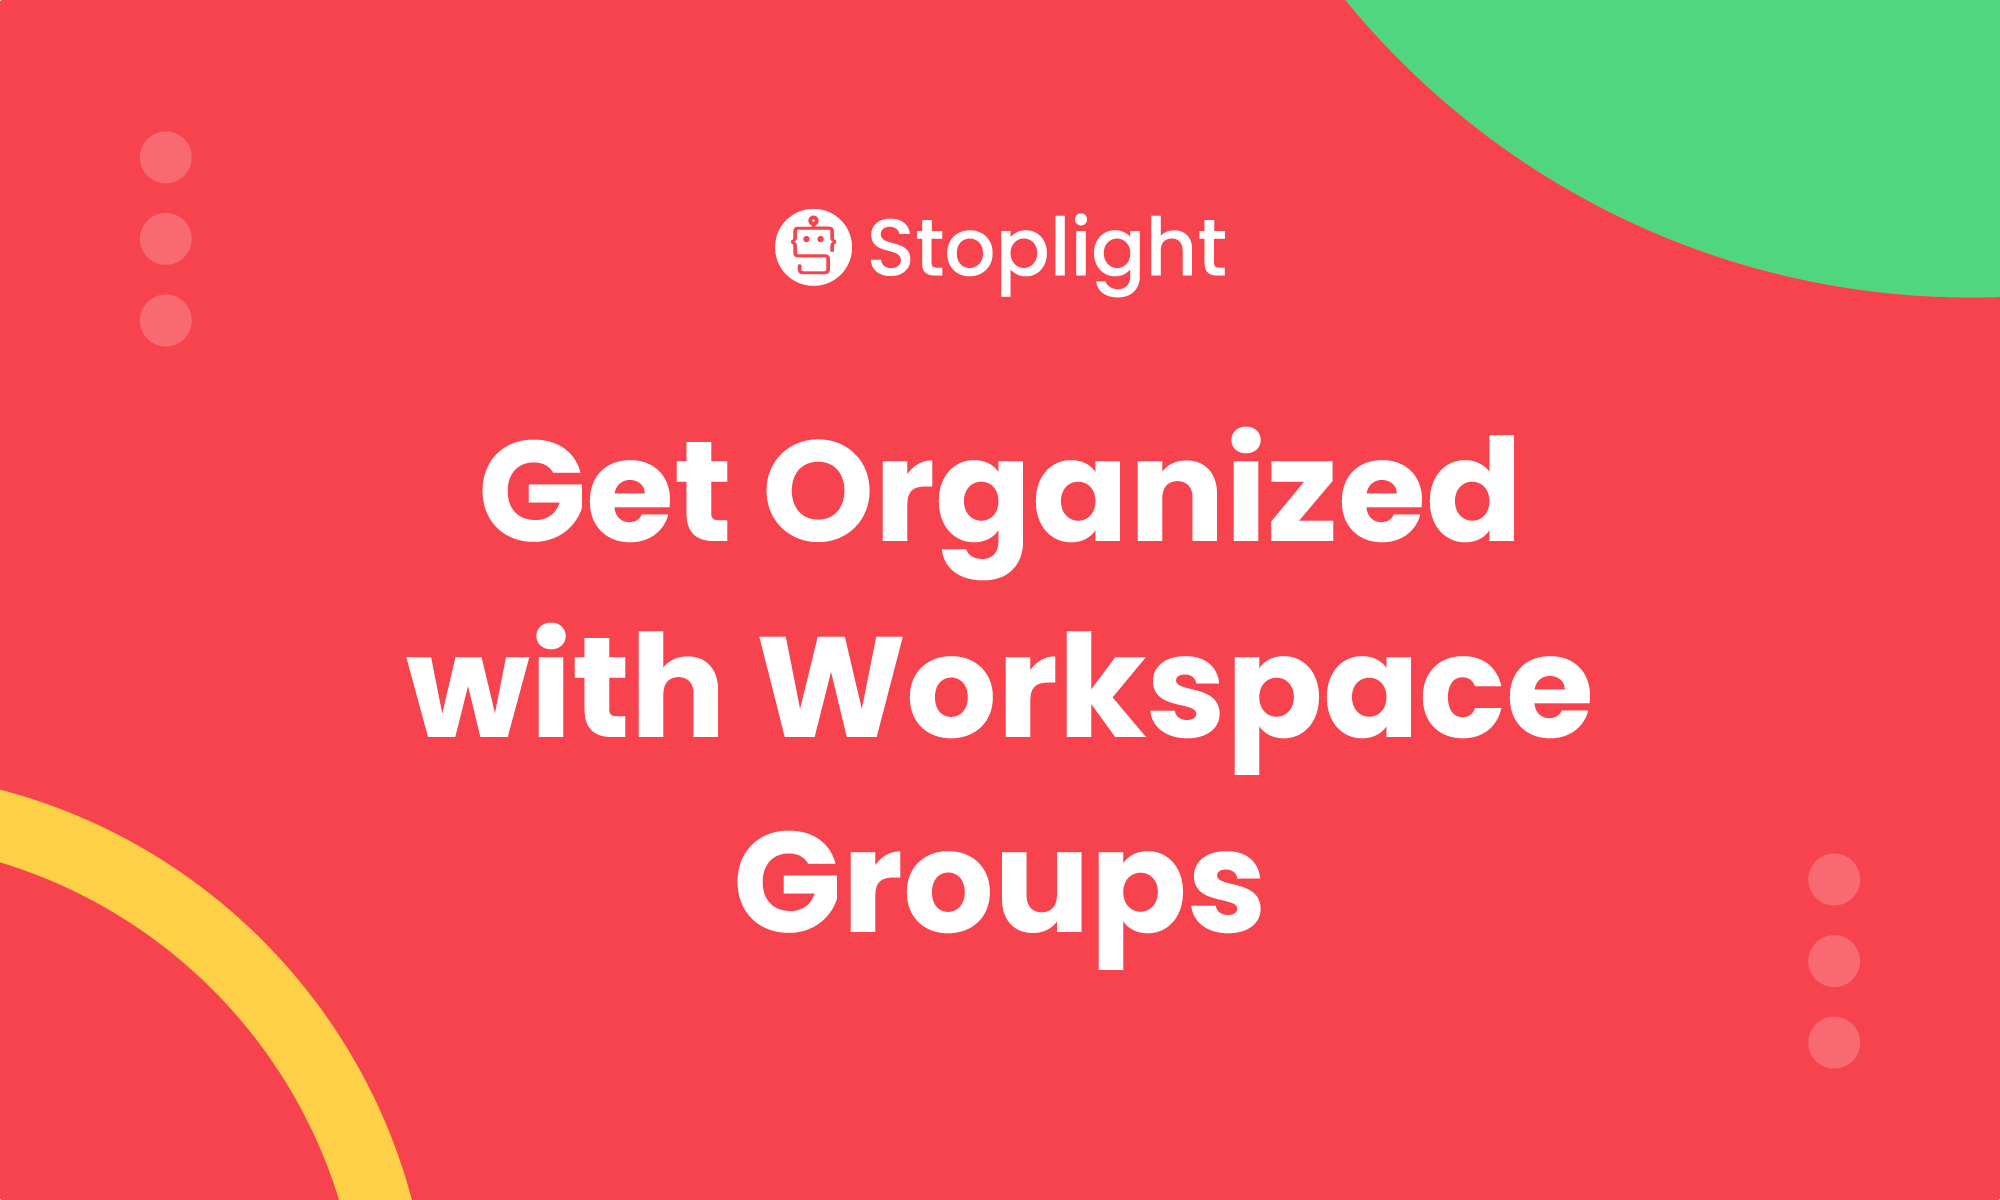 Get Organized with Workspace Groups